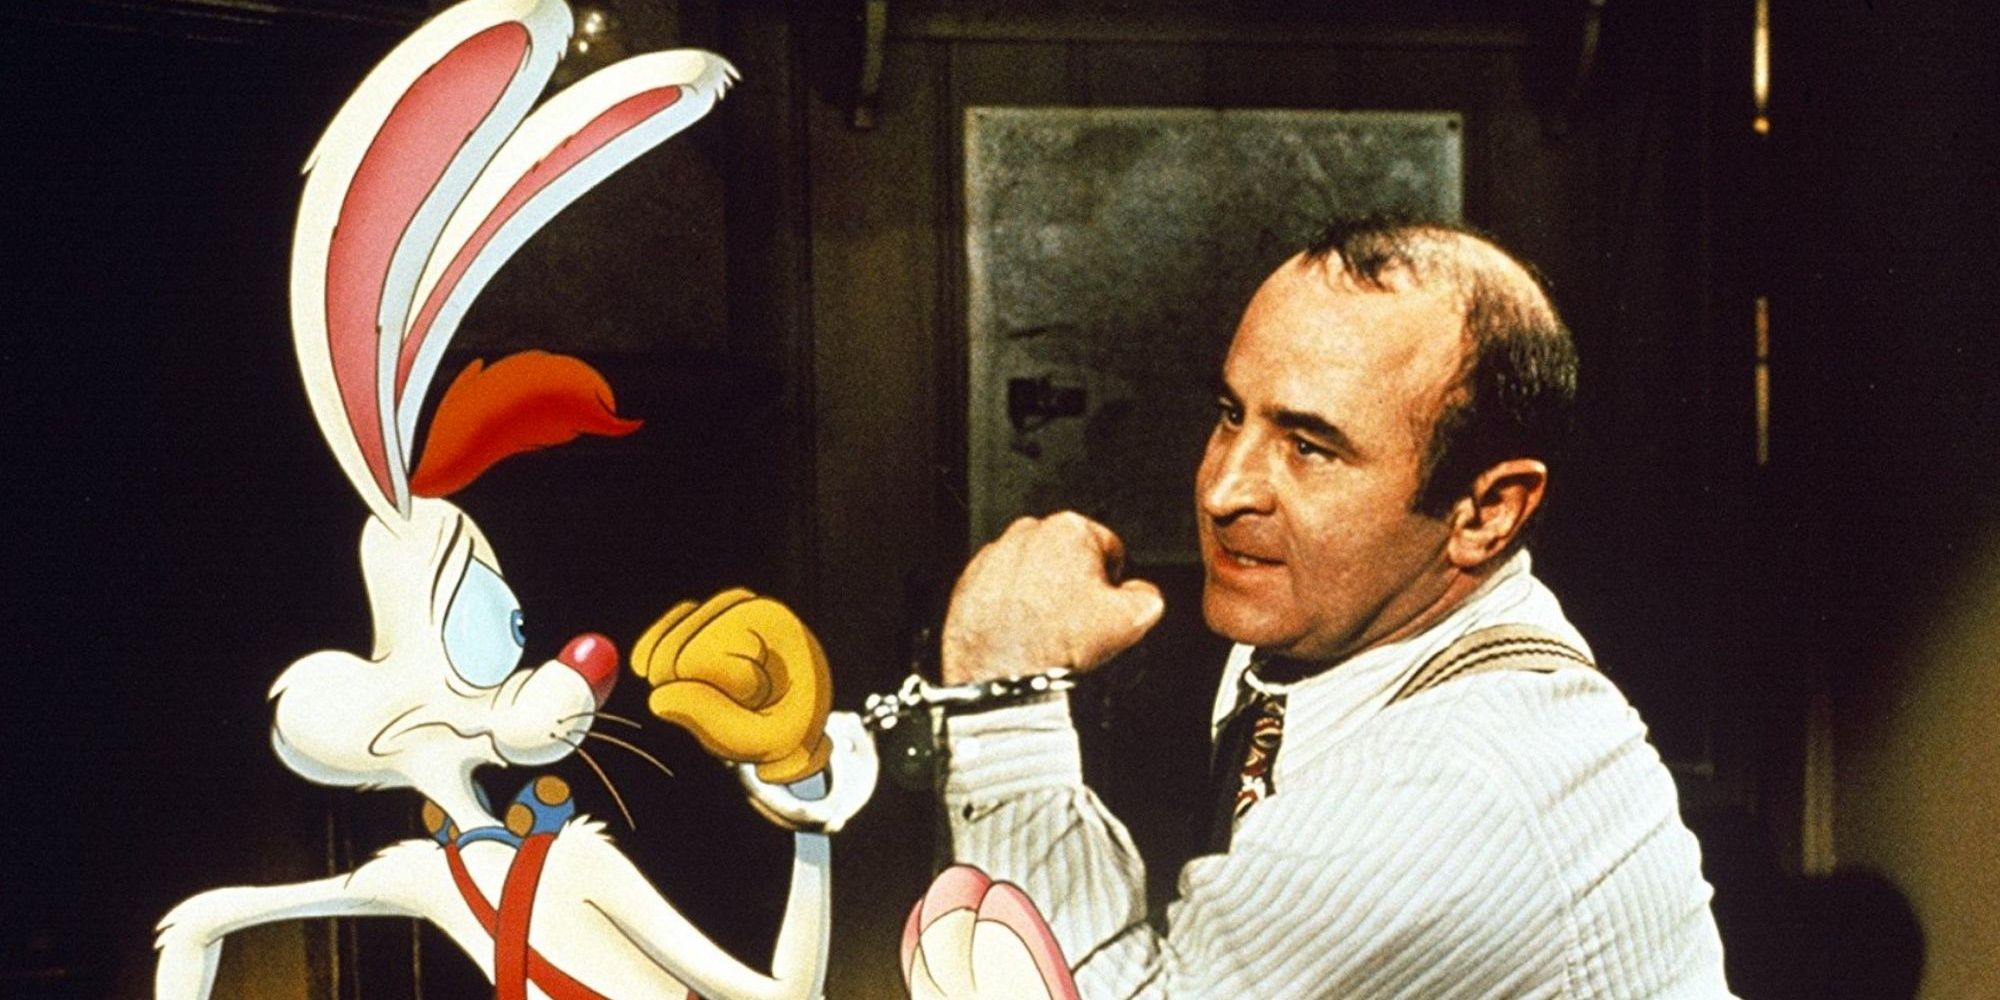 Roger Rabbit and Detective eddie handcuffed together